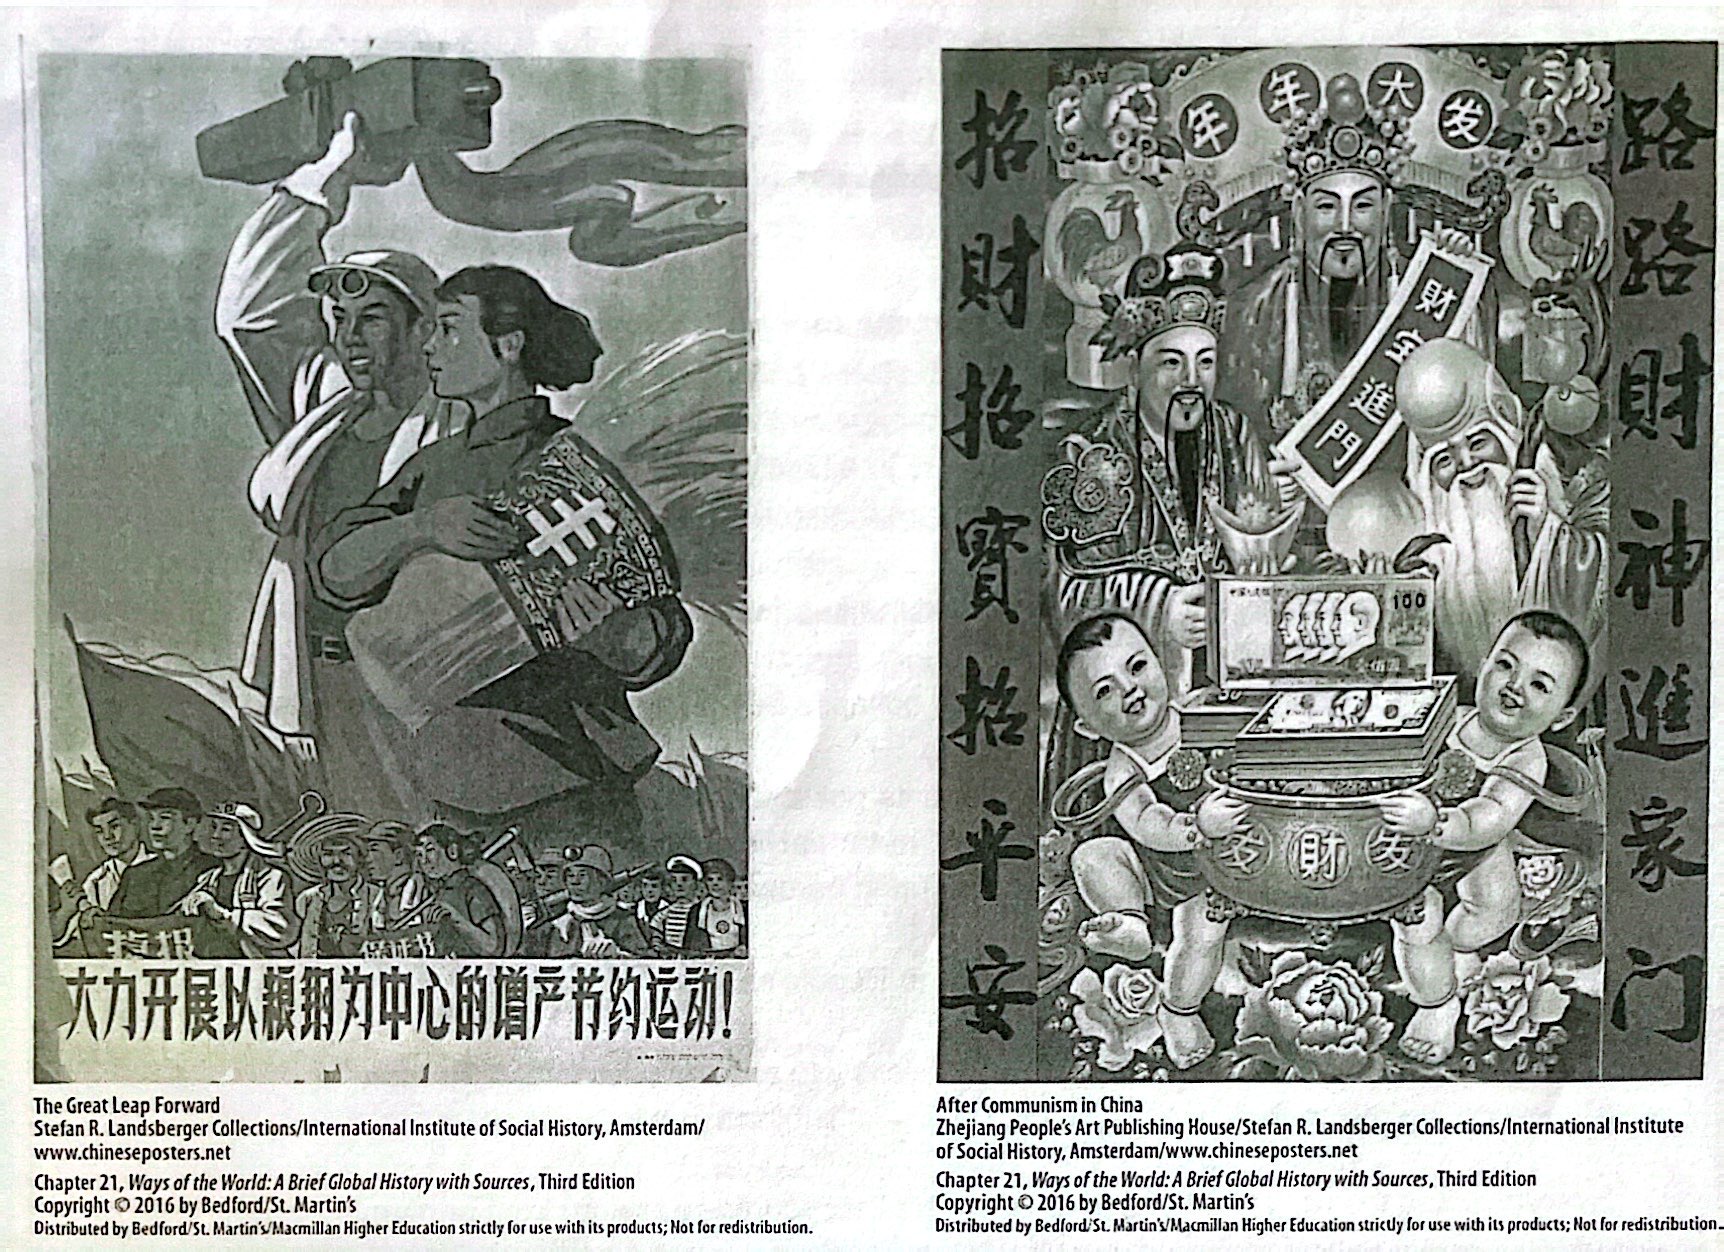 <p><strong>13-1. </strong>Which of these comparisons between the two posters above is most accurate?</p><p>a) Both posters emphasize traditional Buddhist values concerning social hierarchies and government bureaucracies<br>b) While the New Year’s Good Luck poster shows the success of Mao’s policies, the Great Leap Forward poster provides a commentary on the failure of capitalism<br>c) The Great Leap Forward poster emphasizes the equality of society, while the New Year’s Good Luck poster shows more of an emphasis on consumerism<br>d) Both posters celebrate the success of collectivization and rapid industrialization brought about by Mao’s policies</p>